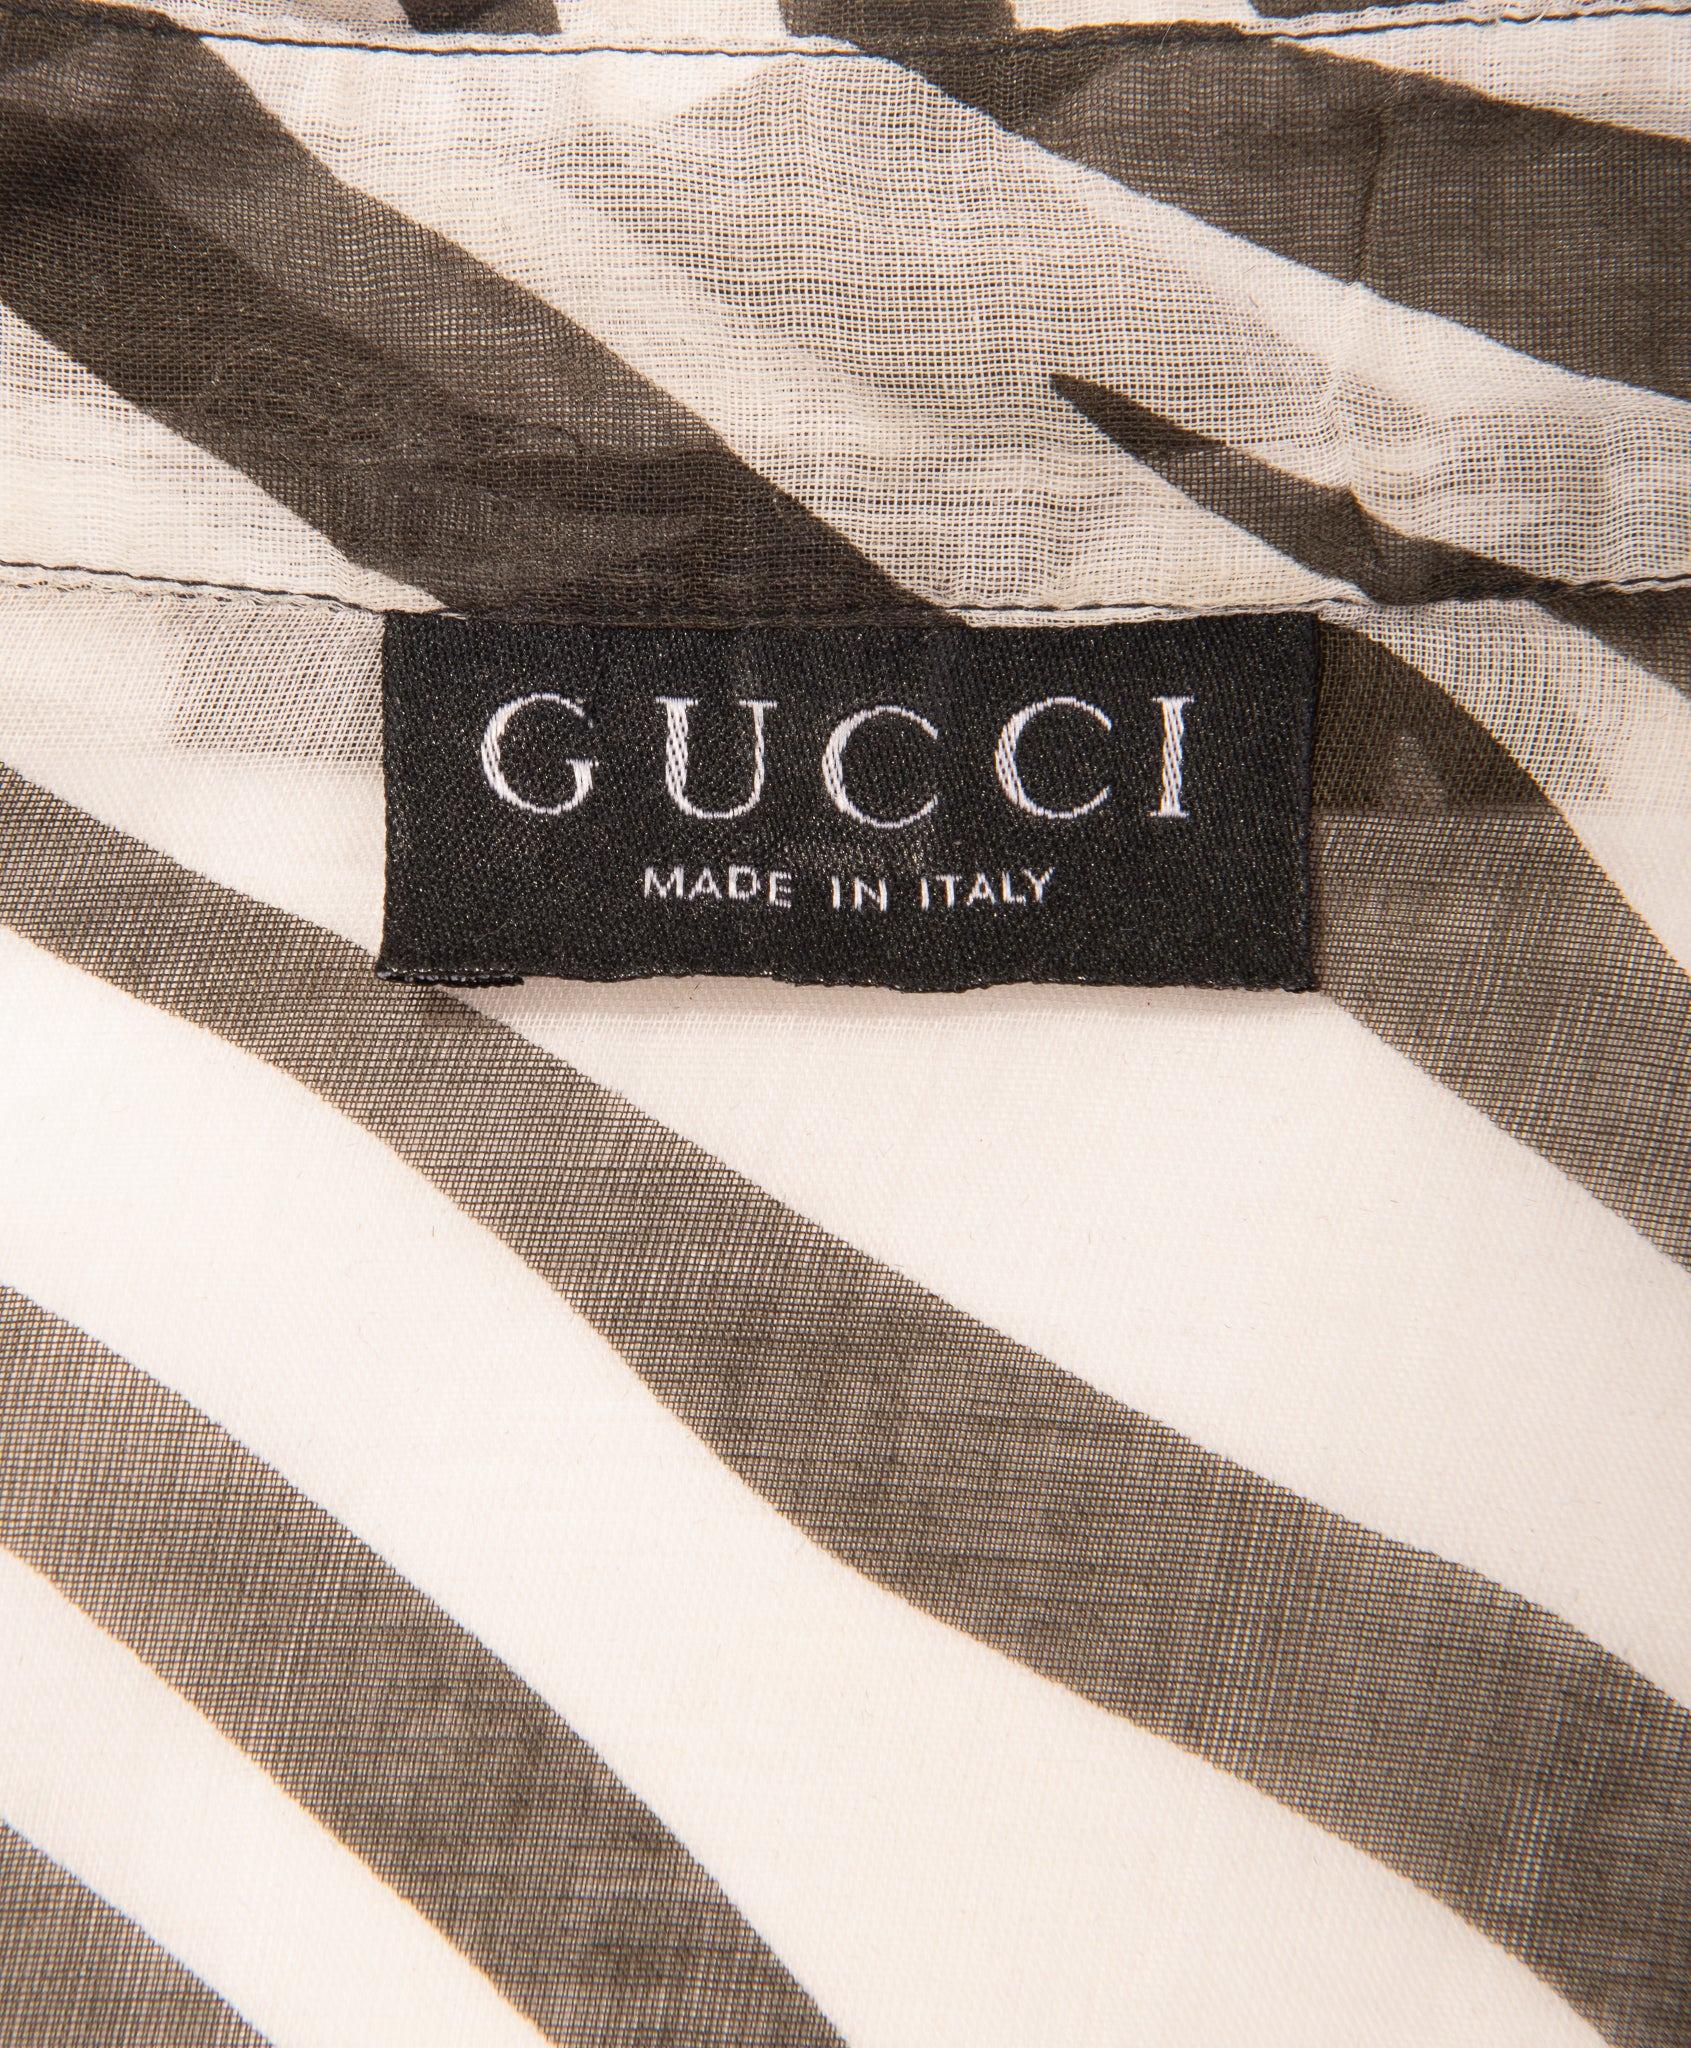 S/S 1996 Gucci by Tom Ford Zebra Print Cotton Top 4